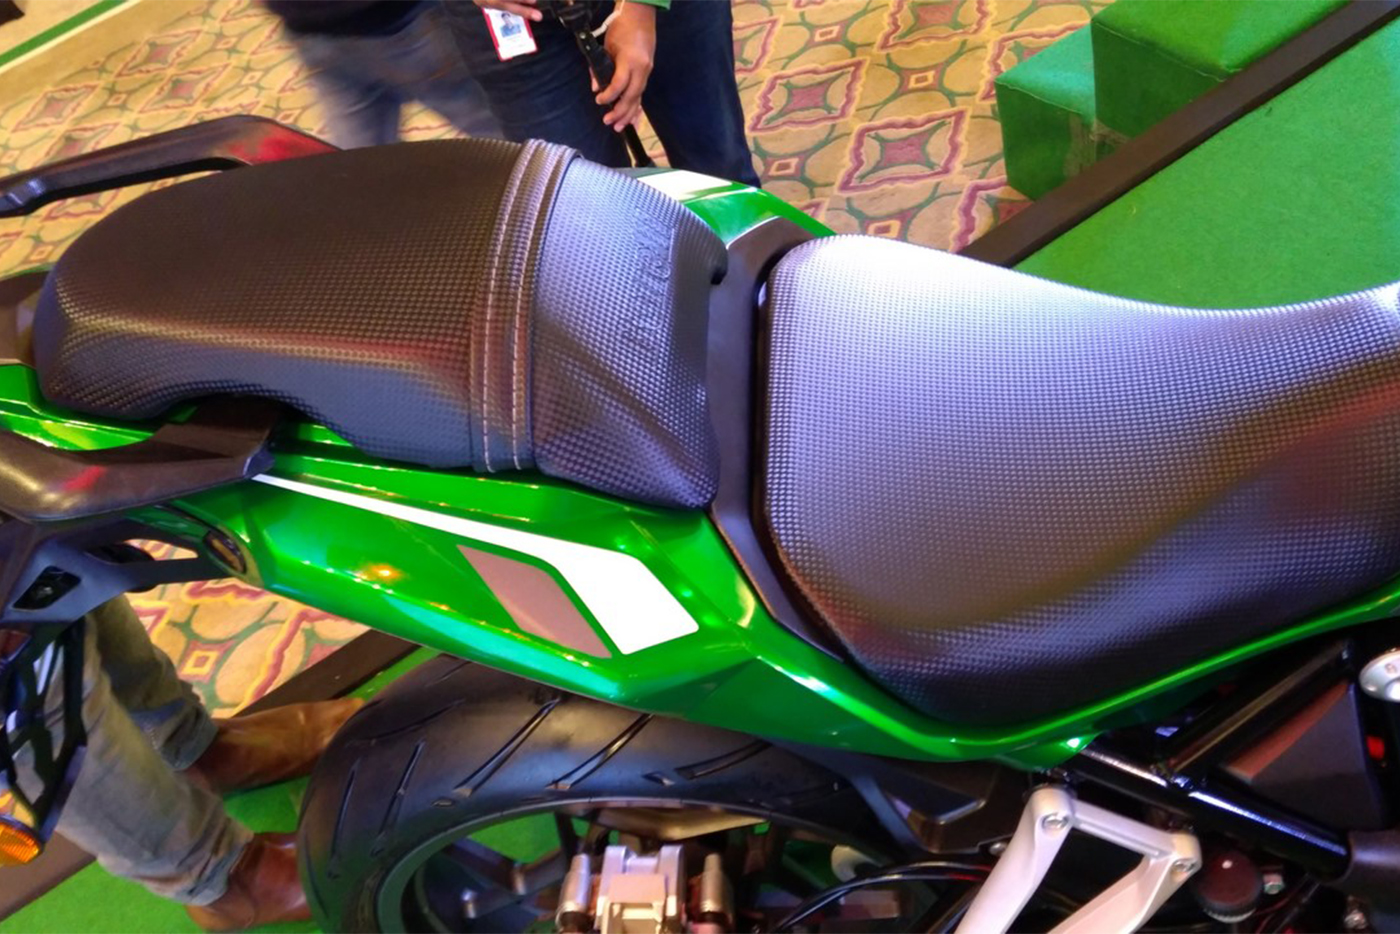 dsk-benelli-302r-seats-indian-launch.jpg